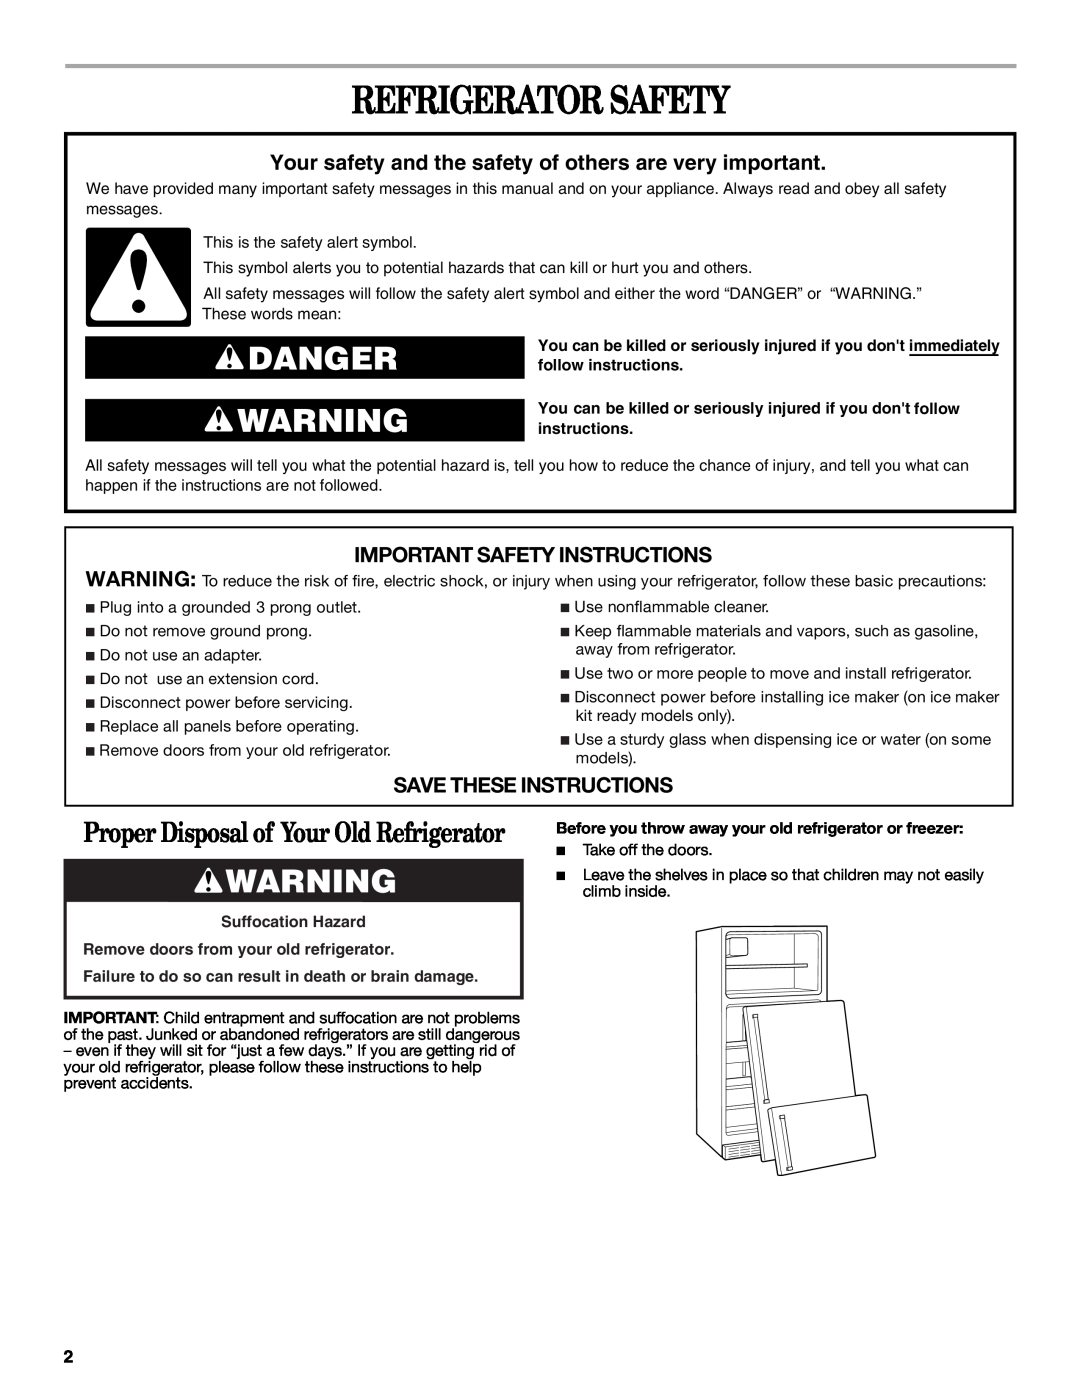 Whirlpool GR2SHTXKS03 Refrigerator Safety, Danger, Proper Disposal of Your Old Refrigerator, Important Safety Instructions 